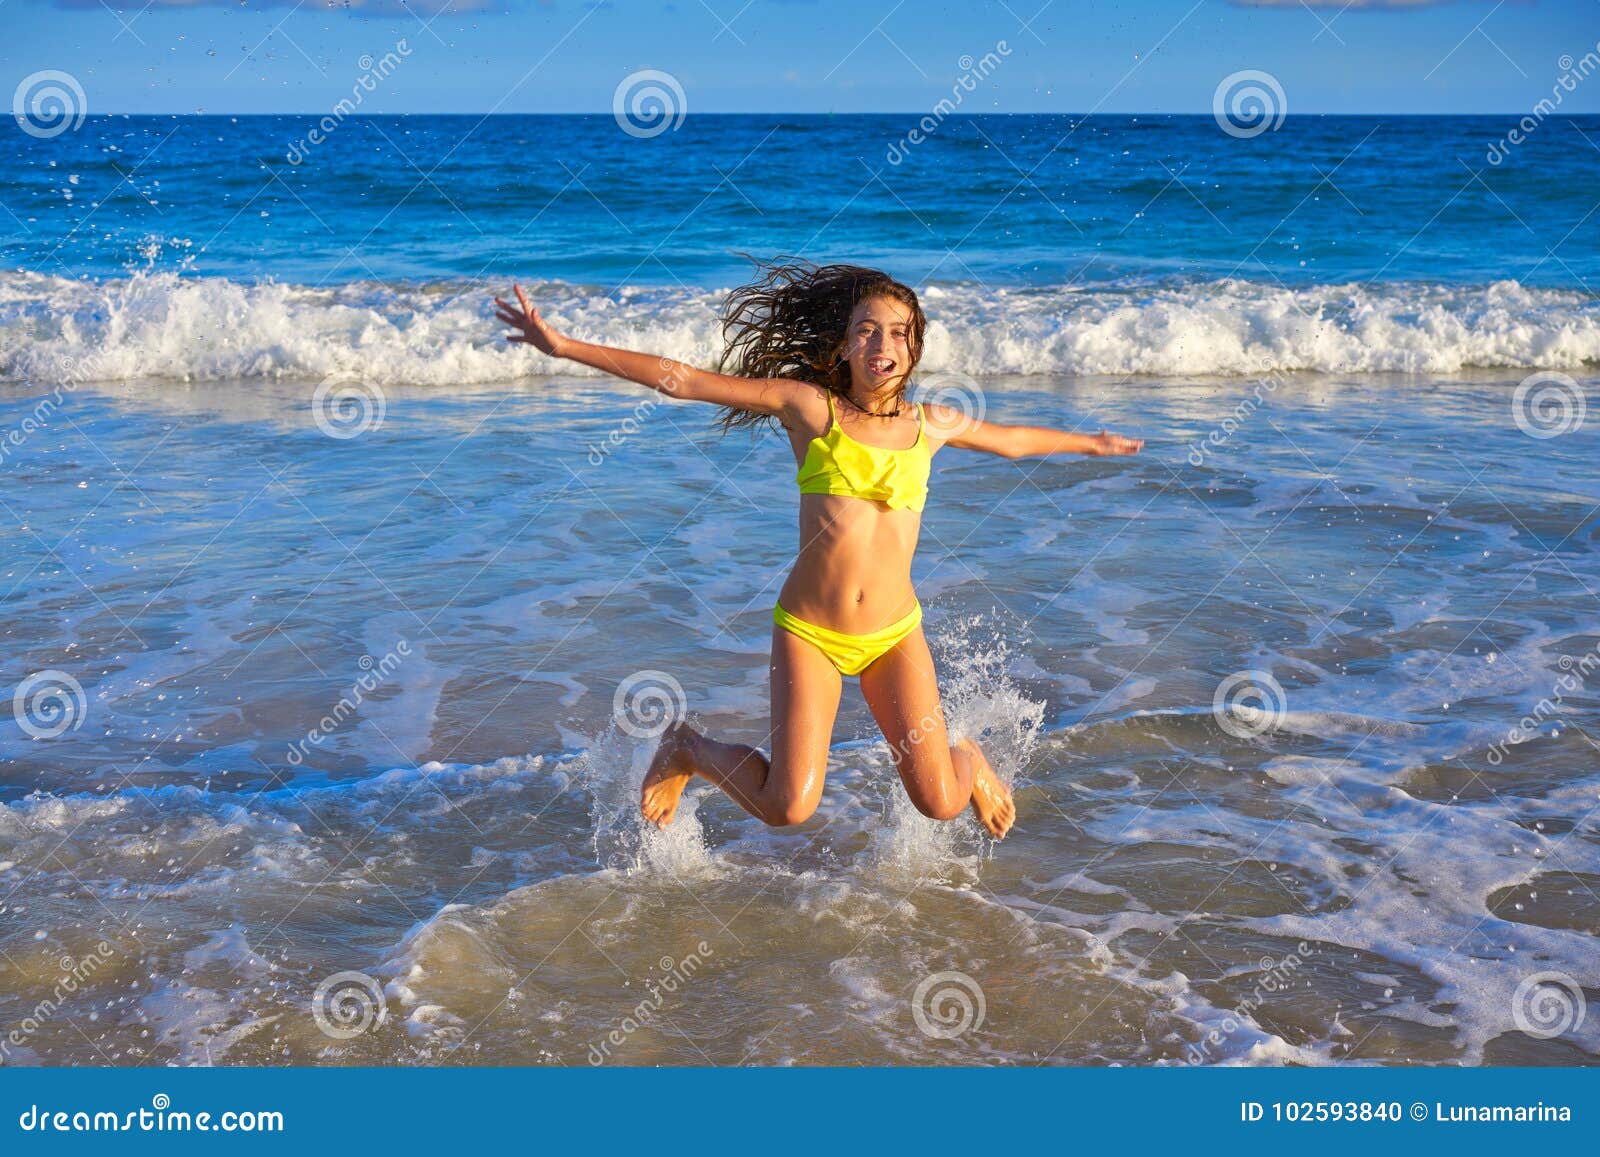 Teen Girl In A Bikini Stock Photo, Picture and Royalty Free Image. Image  22070902.